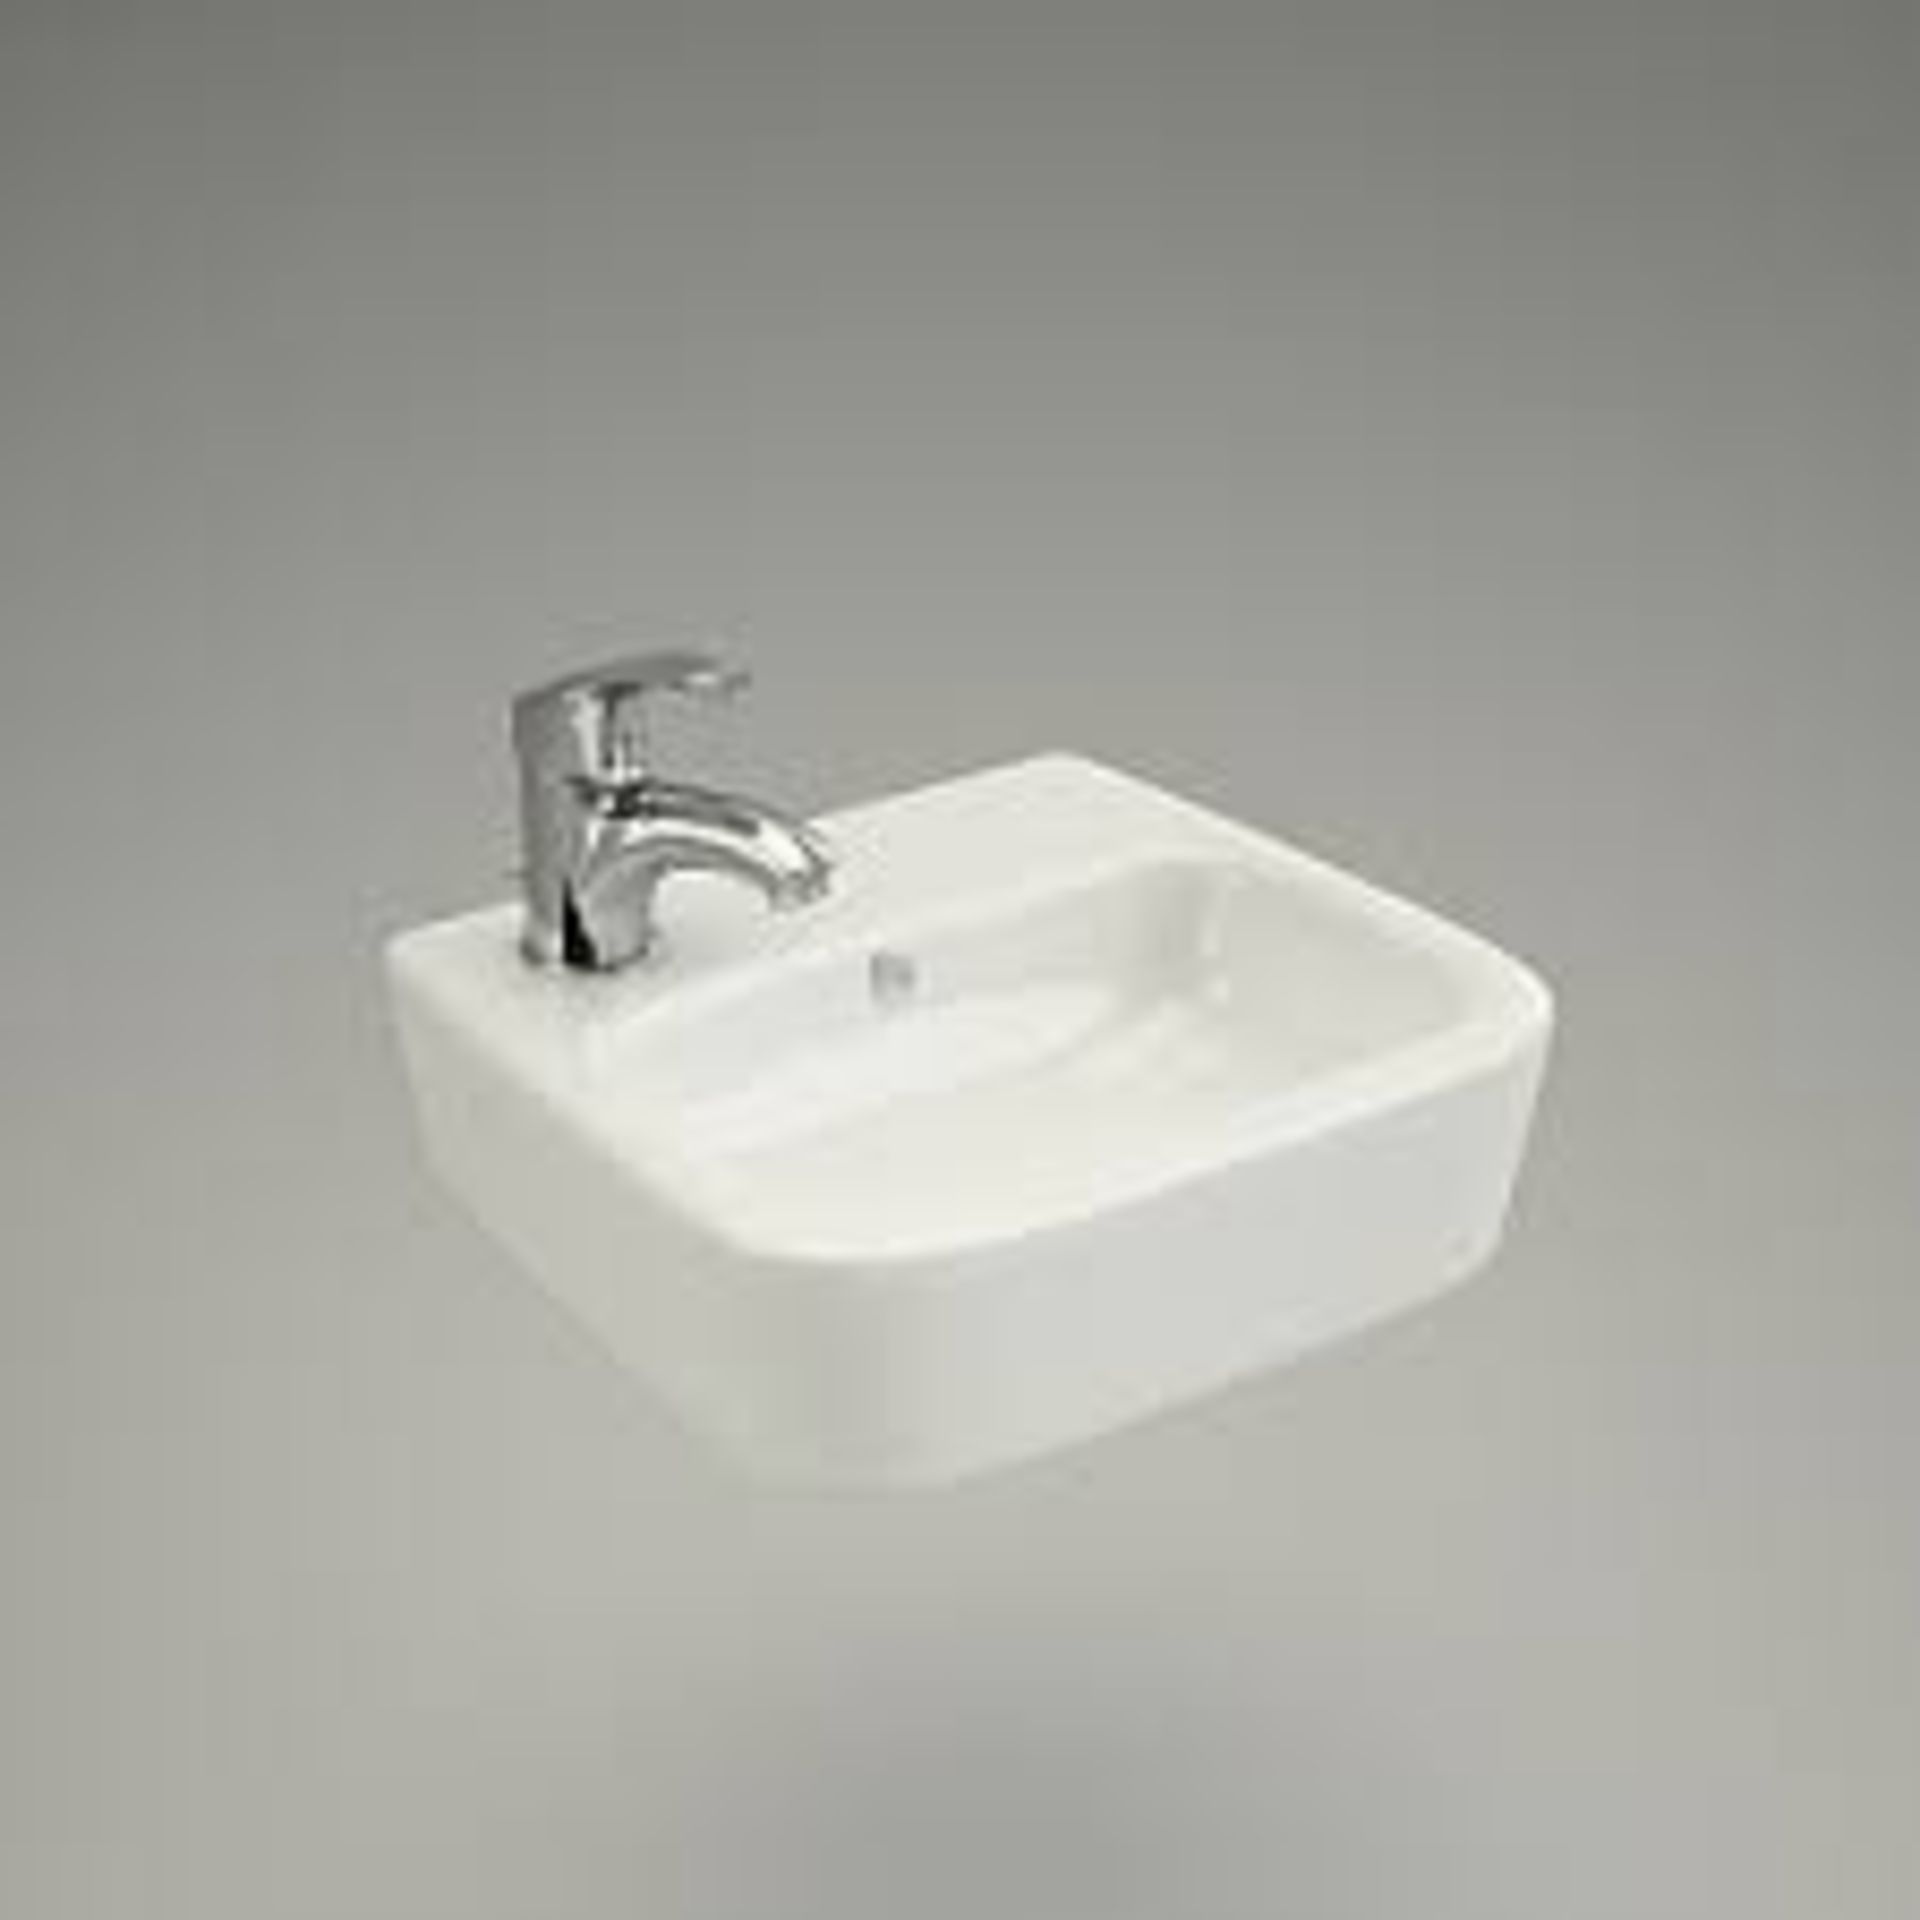 314 | 27 x Facile 40cm Right hand basin RRP of Pallet - £809.73 Delivery charged at £50 + VAT per